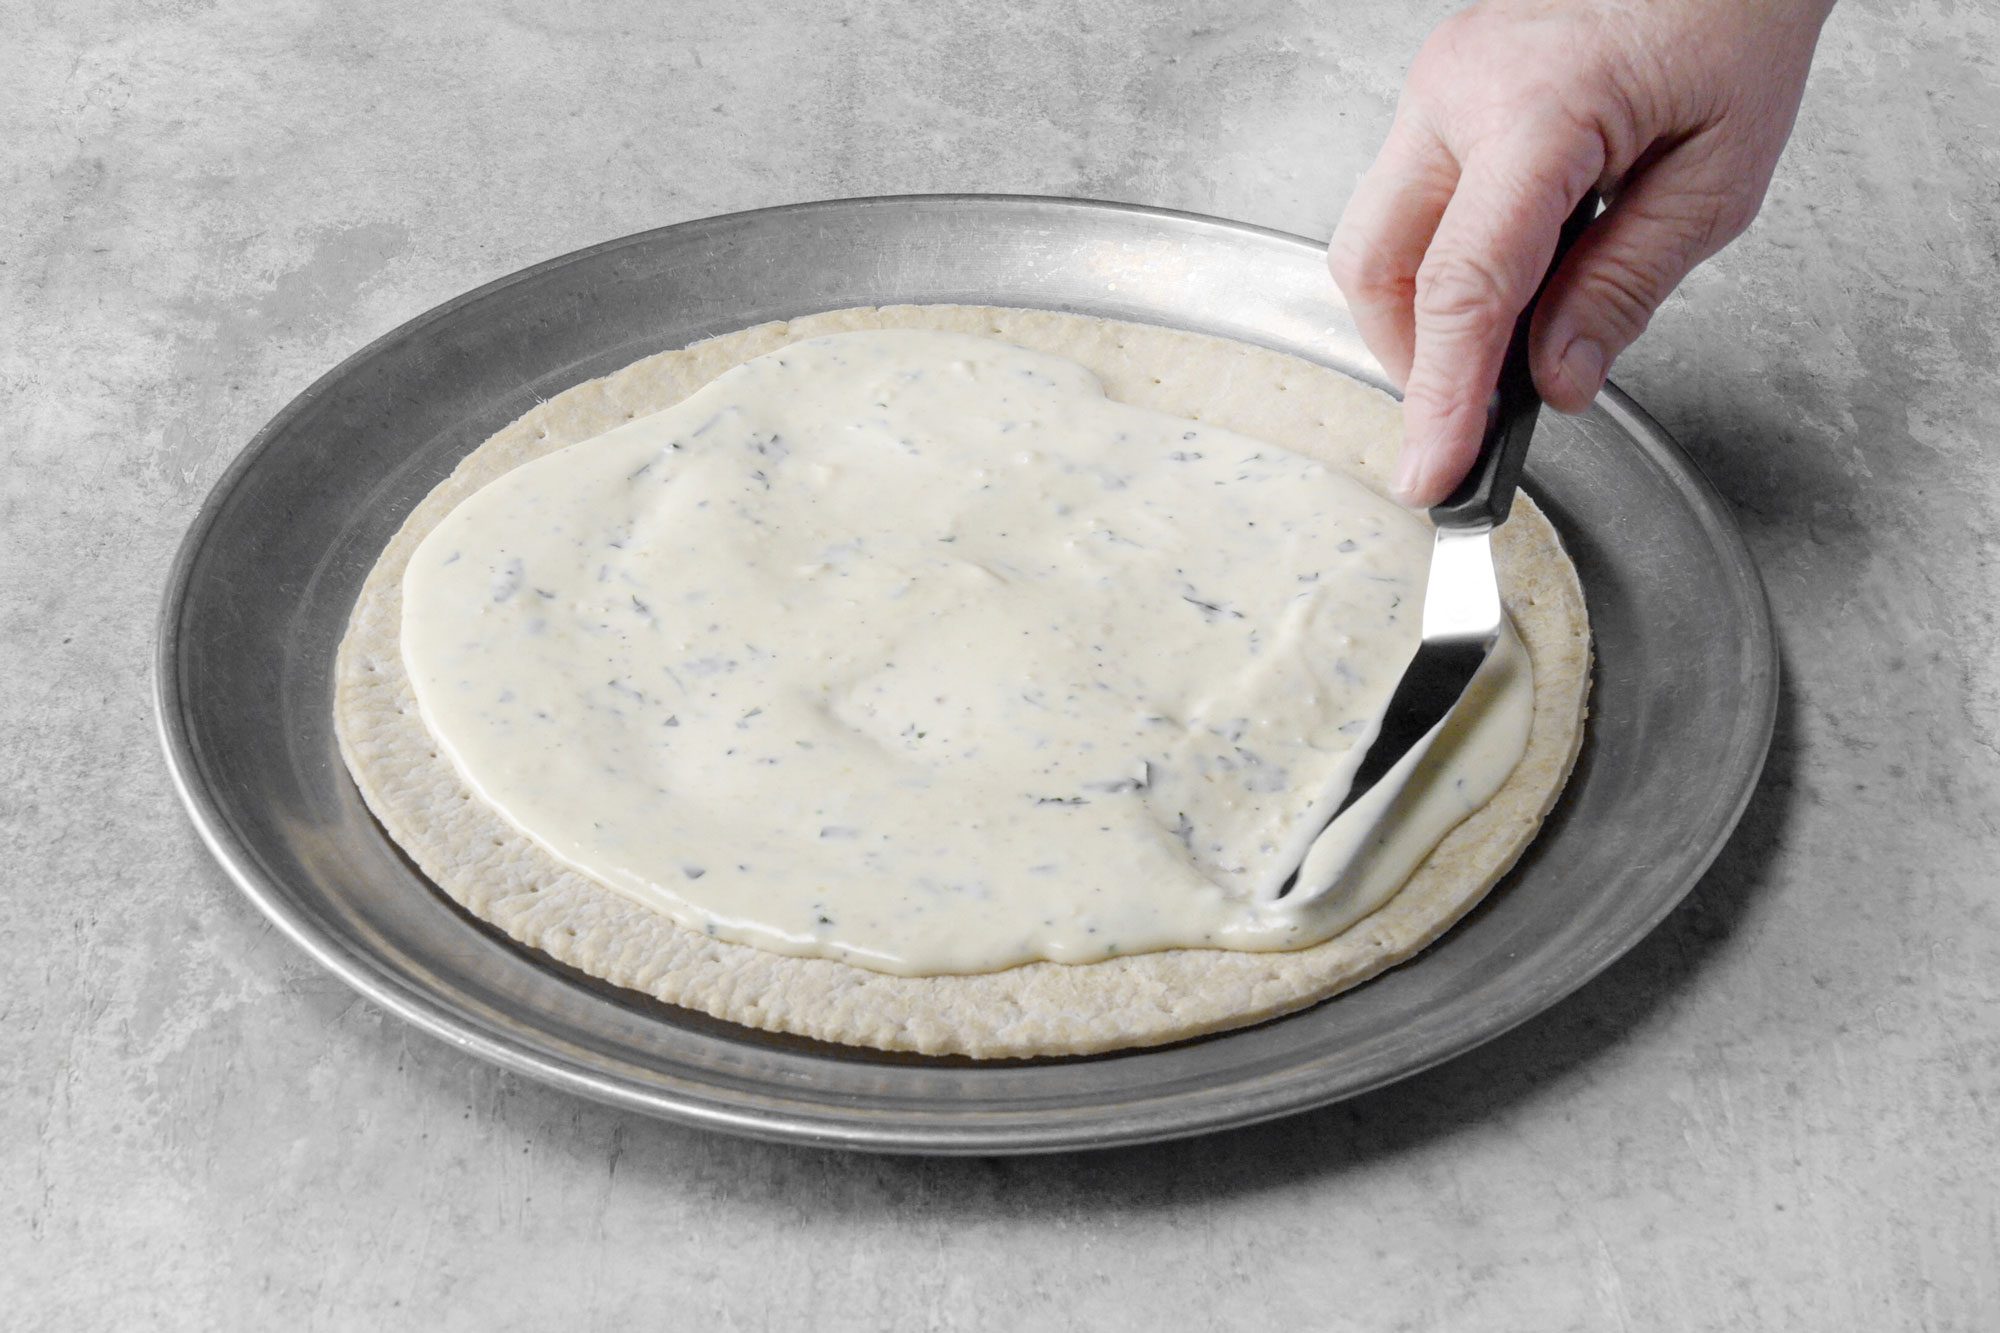 Spread the Alfredo sauce on pre-baked pizza crust